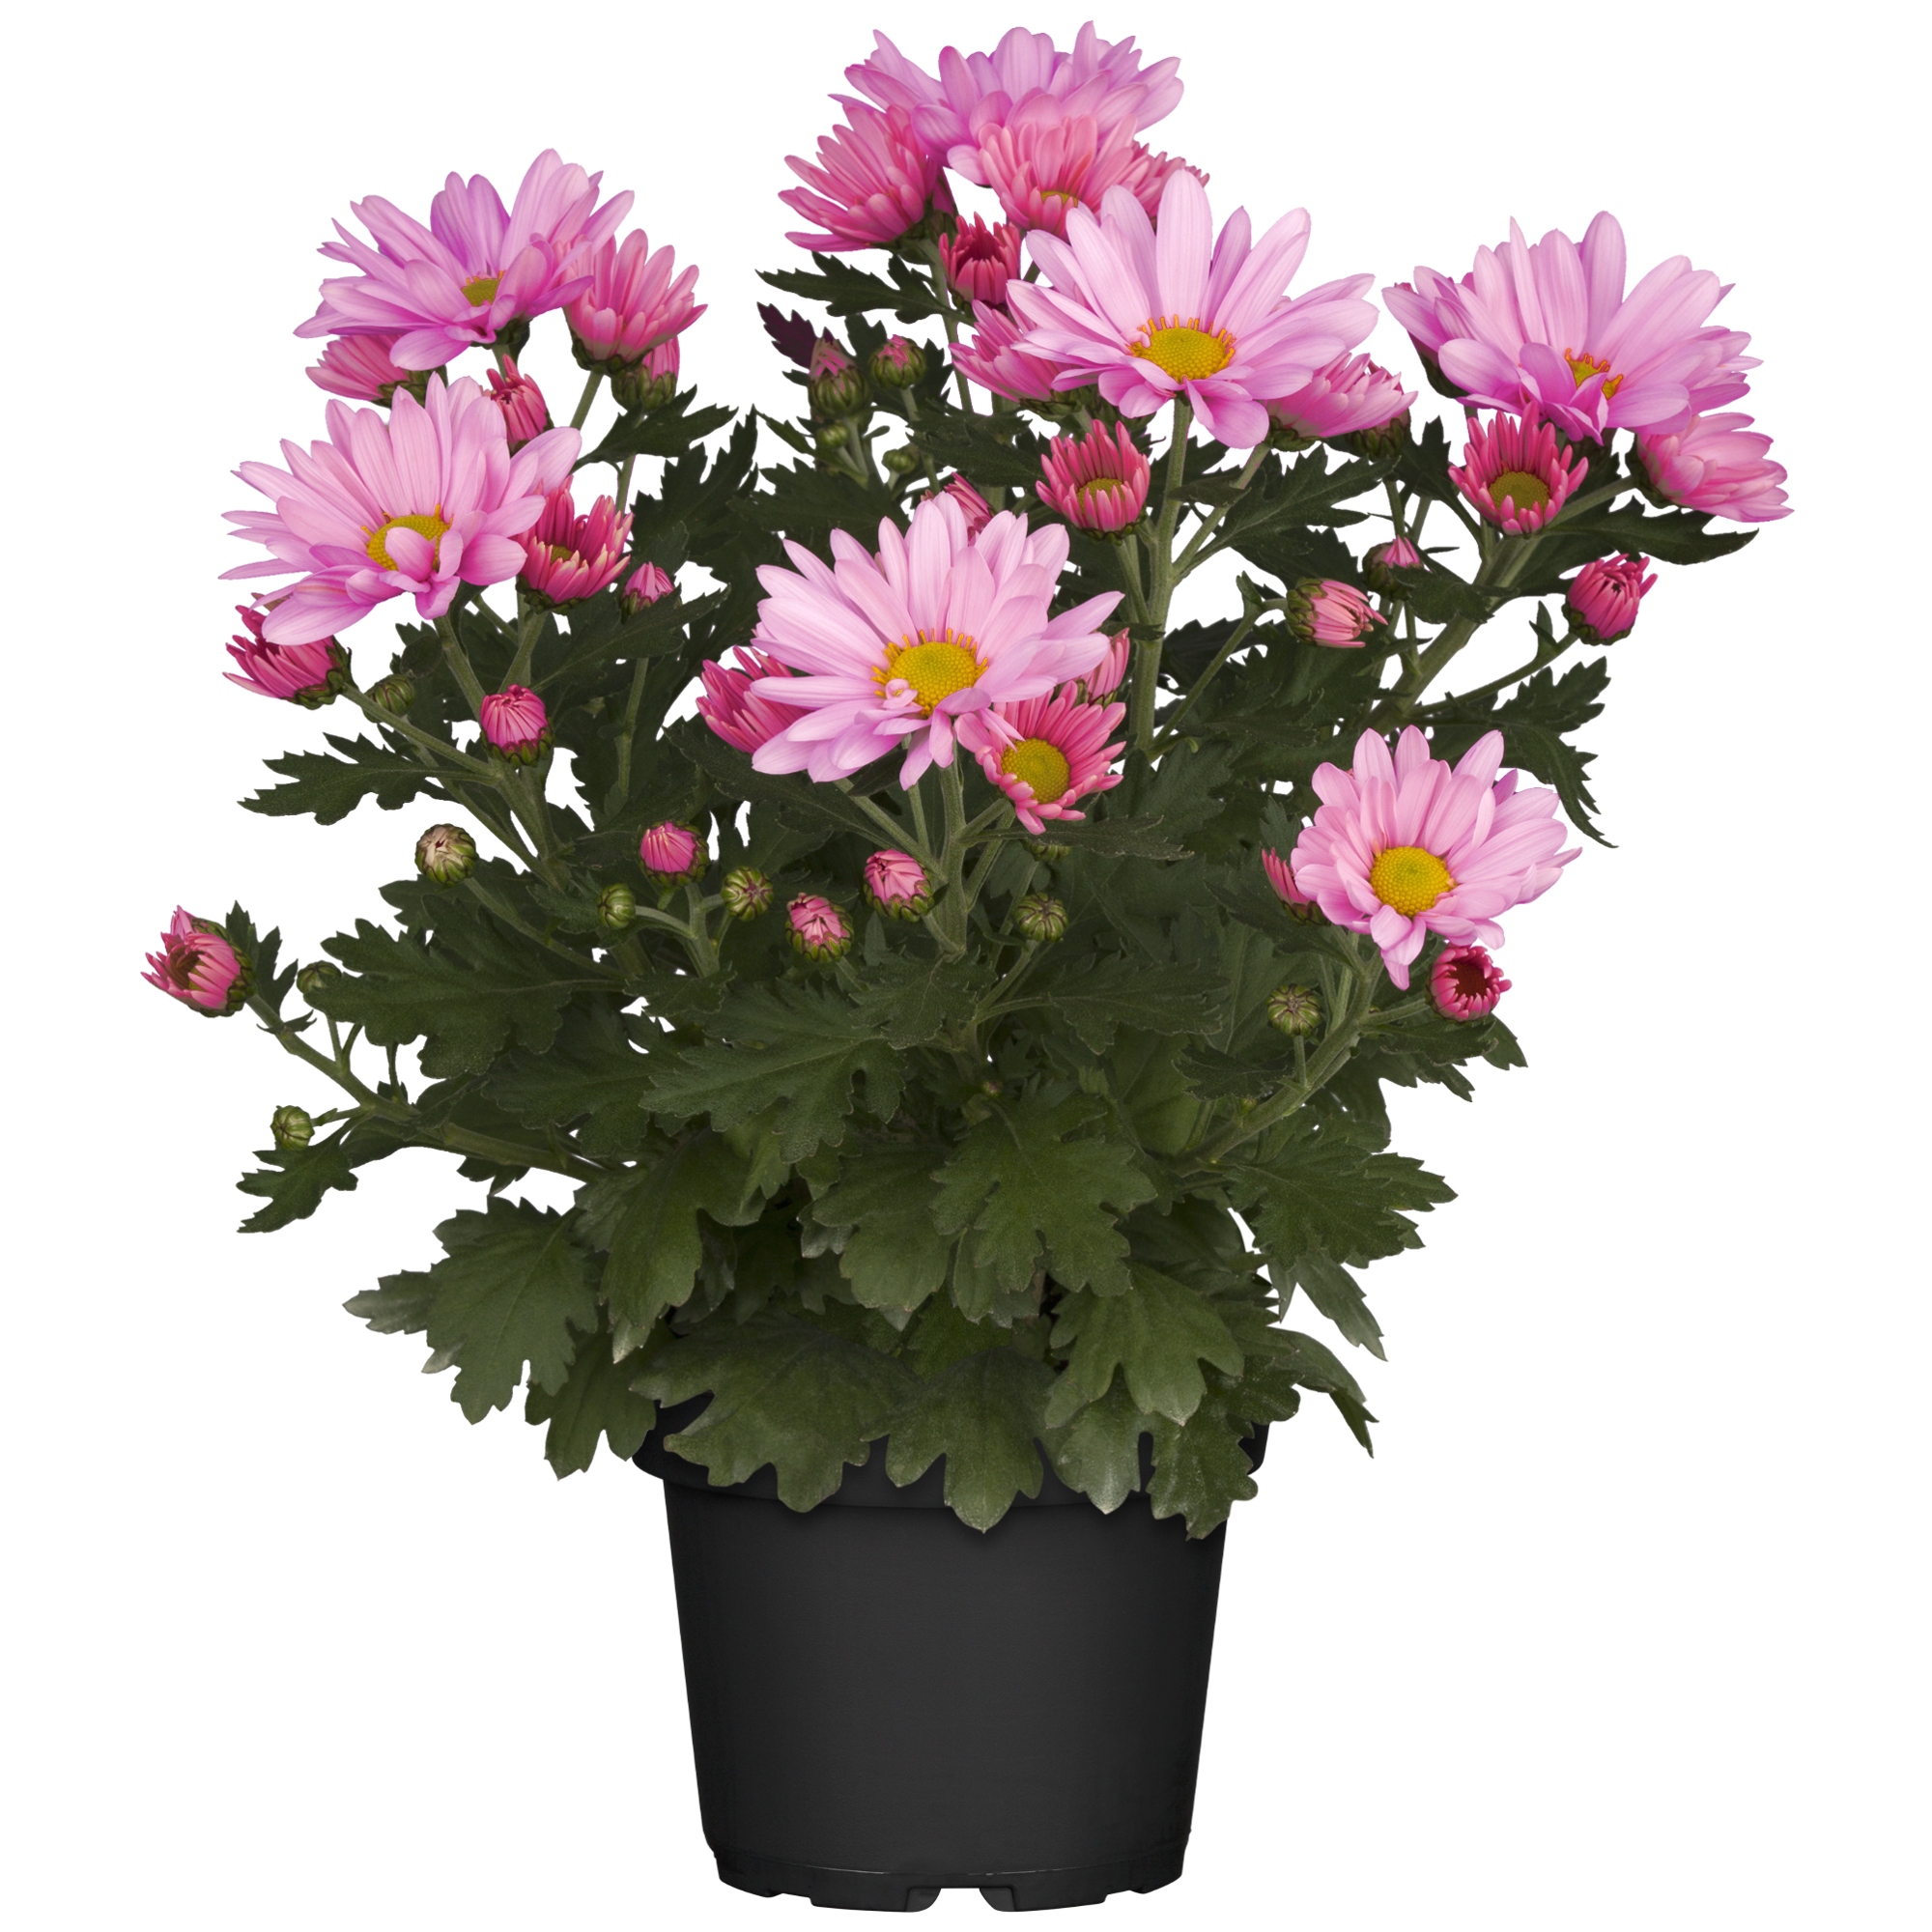 Bauernchrysantheme pink 12 cm Topf, 2er-Set + product picture